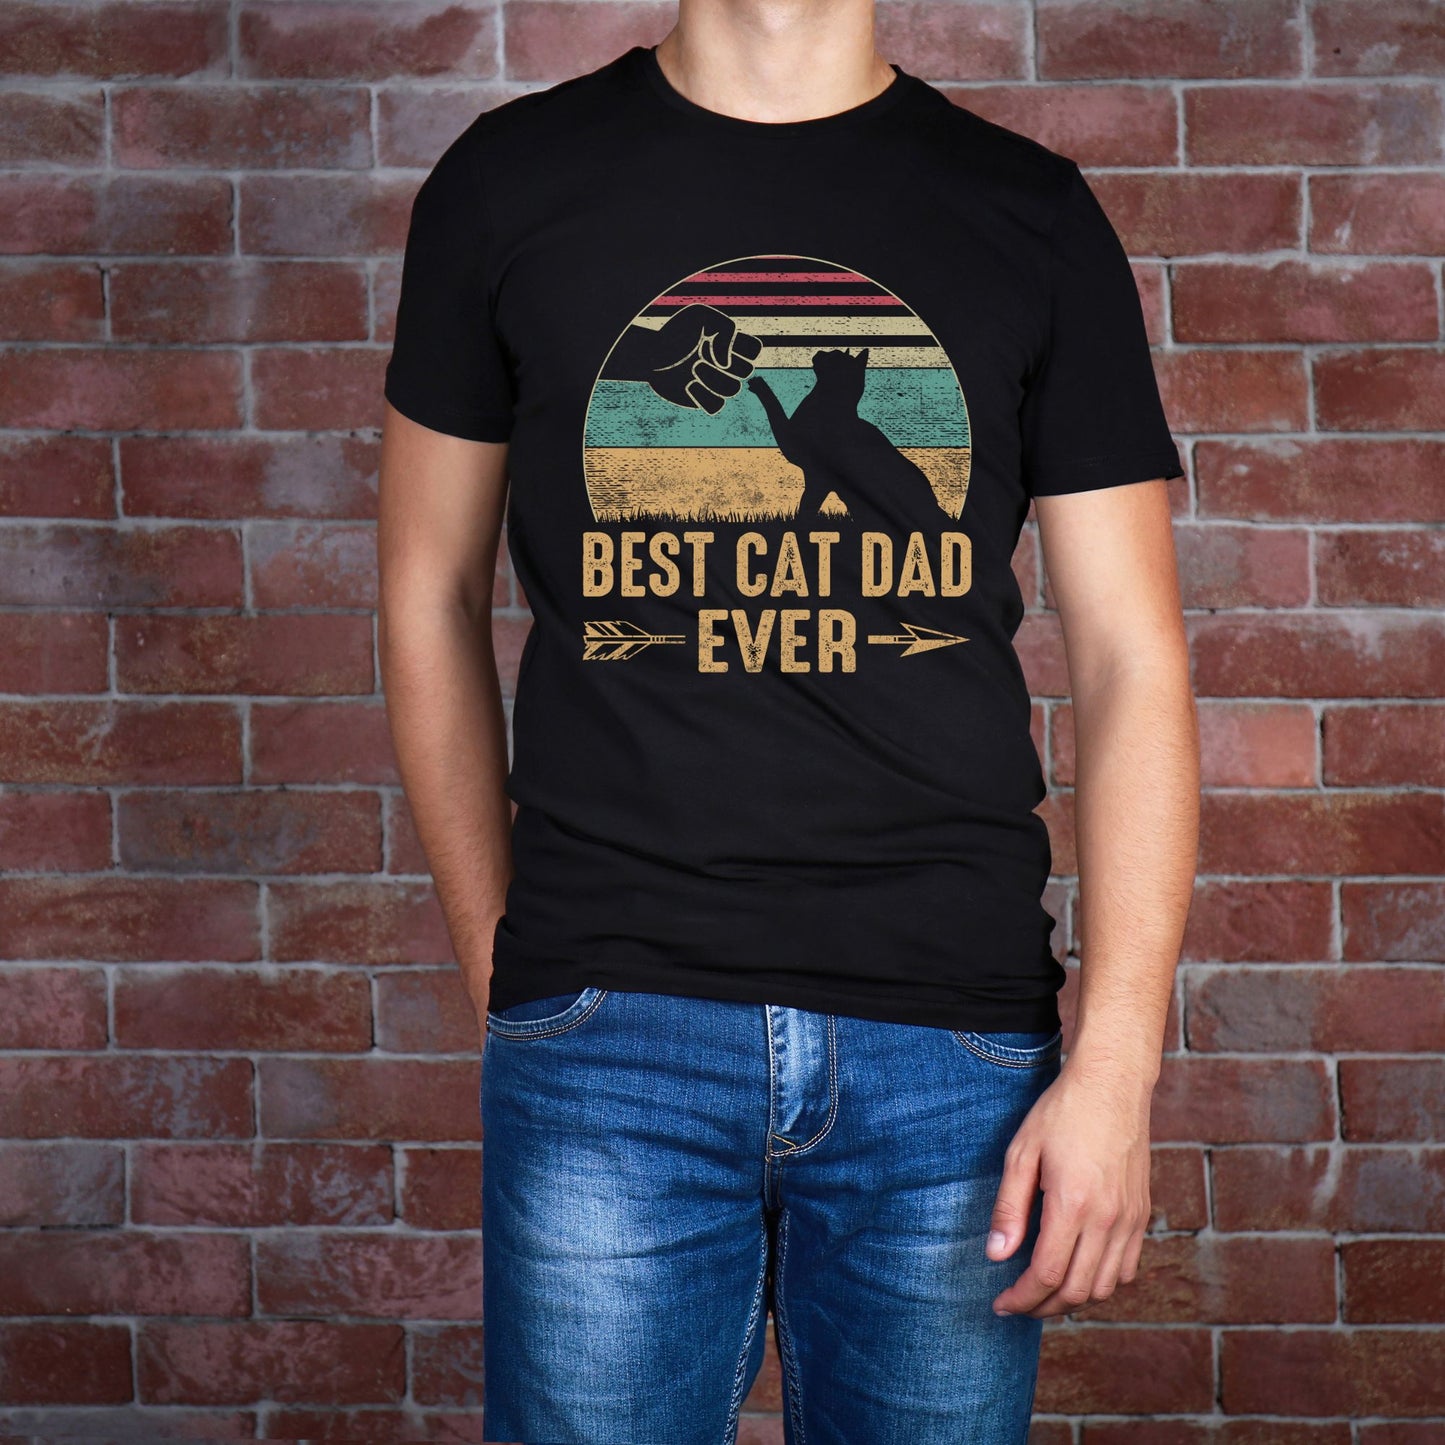 "Cat Dad Ever" T-Shirt for Vintage Father's Day Gift